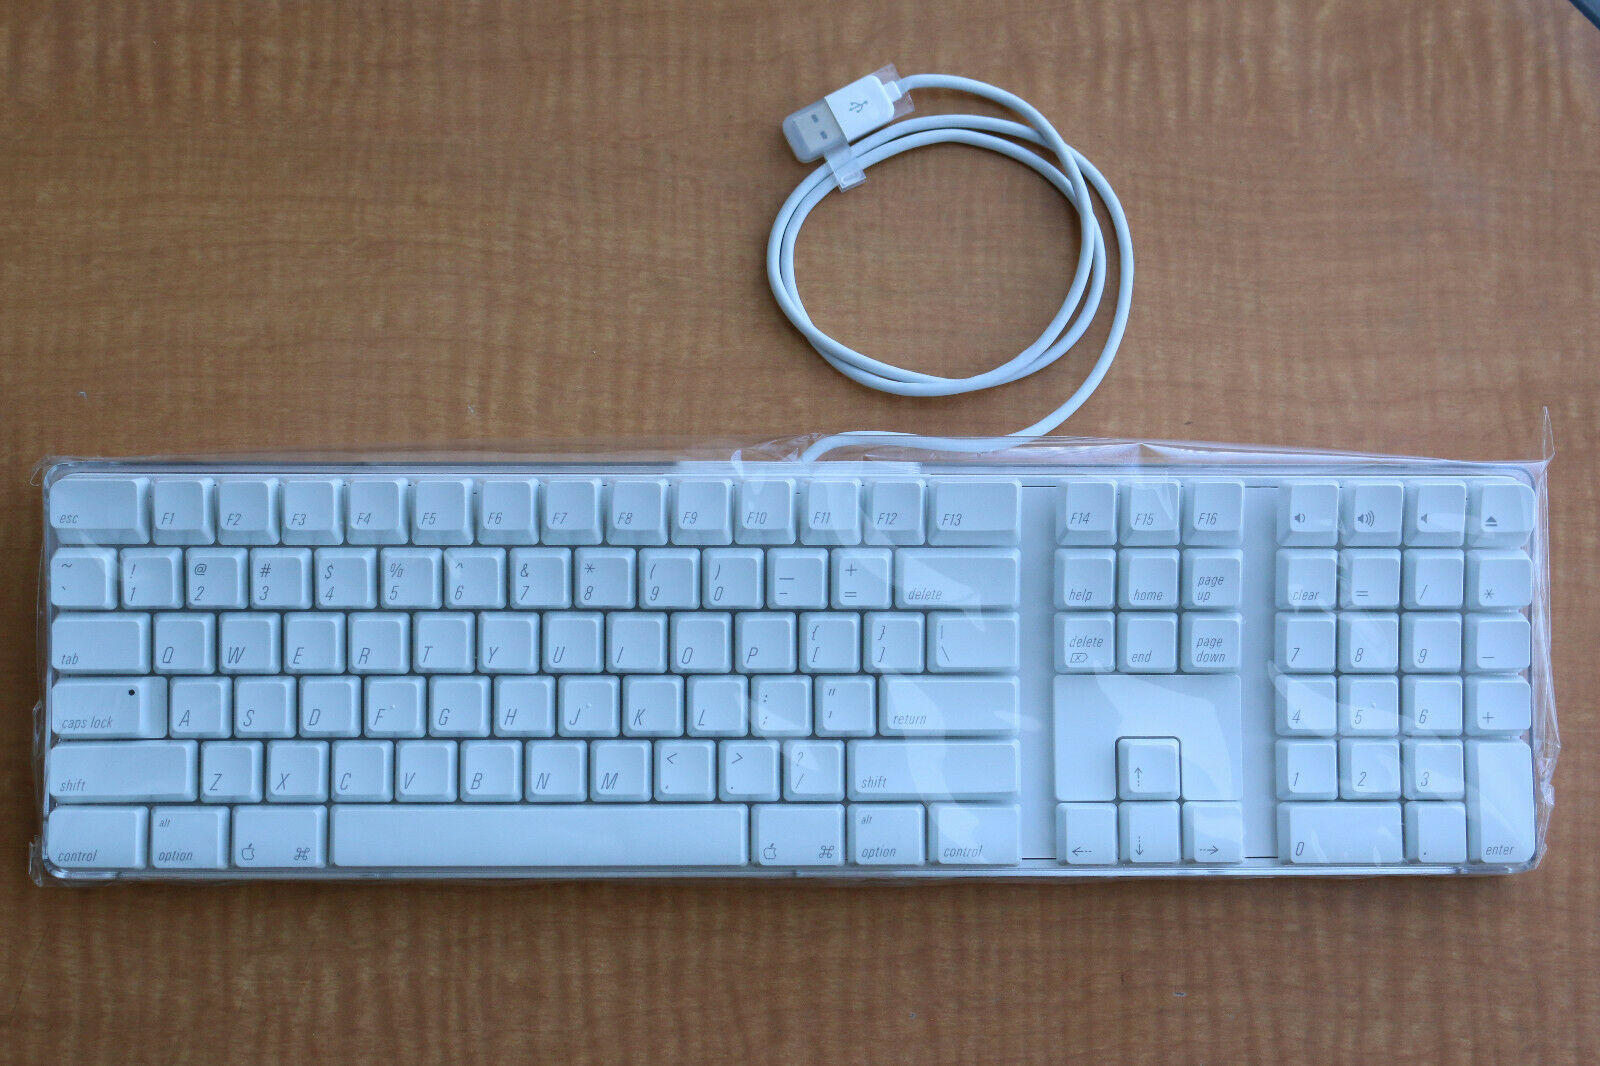 Brand New Apple A1048 English Layout Wired Full Size Usb Keyboard 658-0306 (2sb)